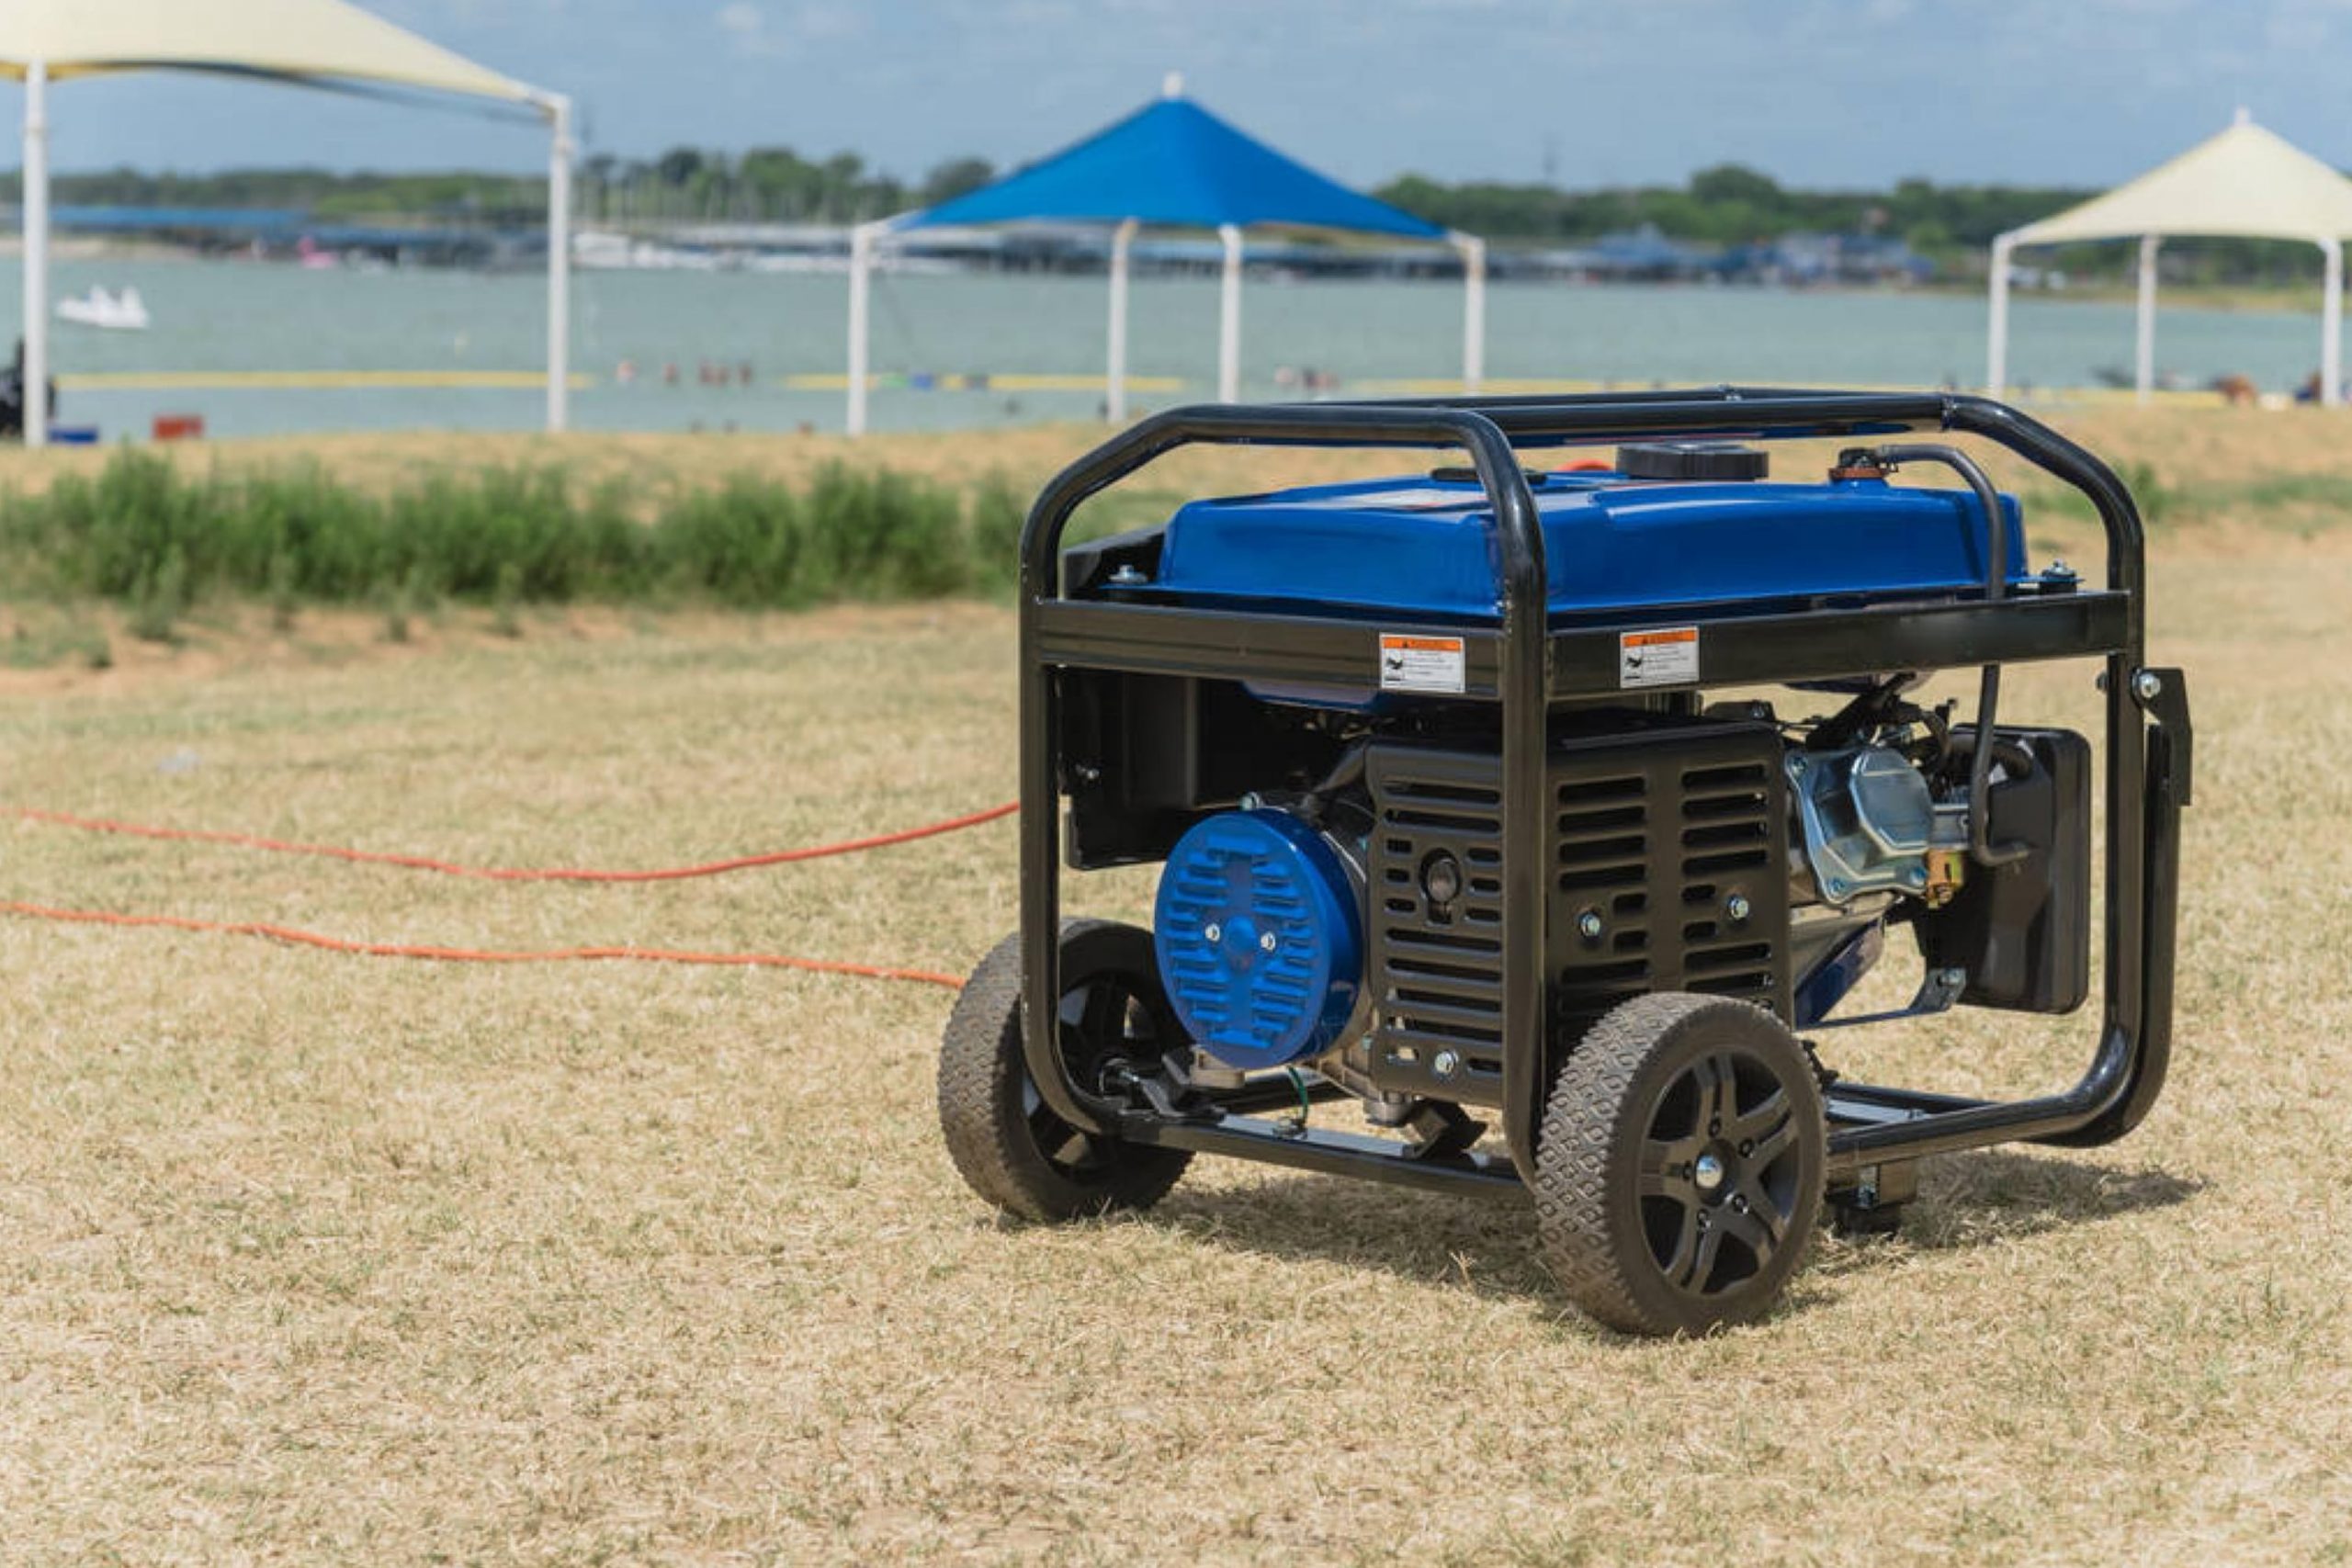 Empty Your Portable Generator’s Tank After Use